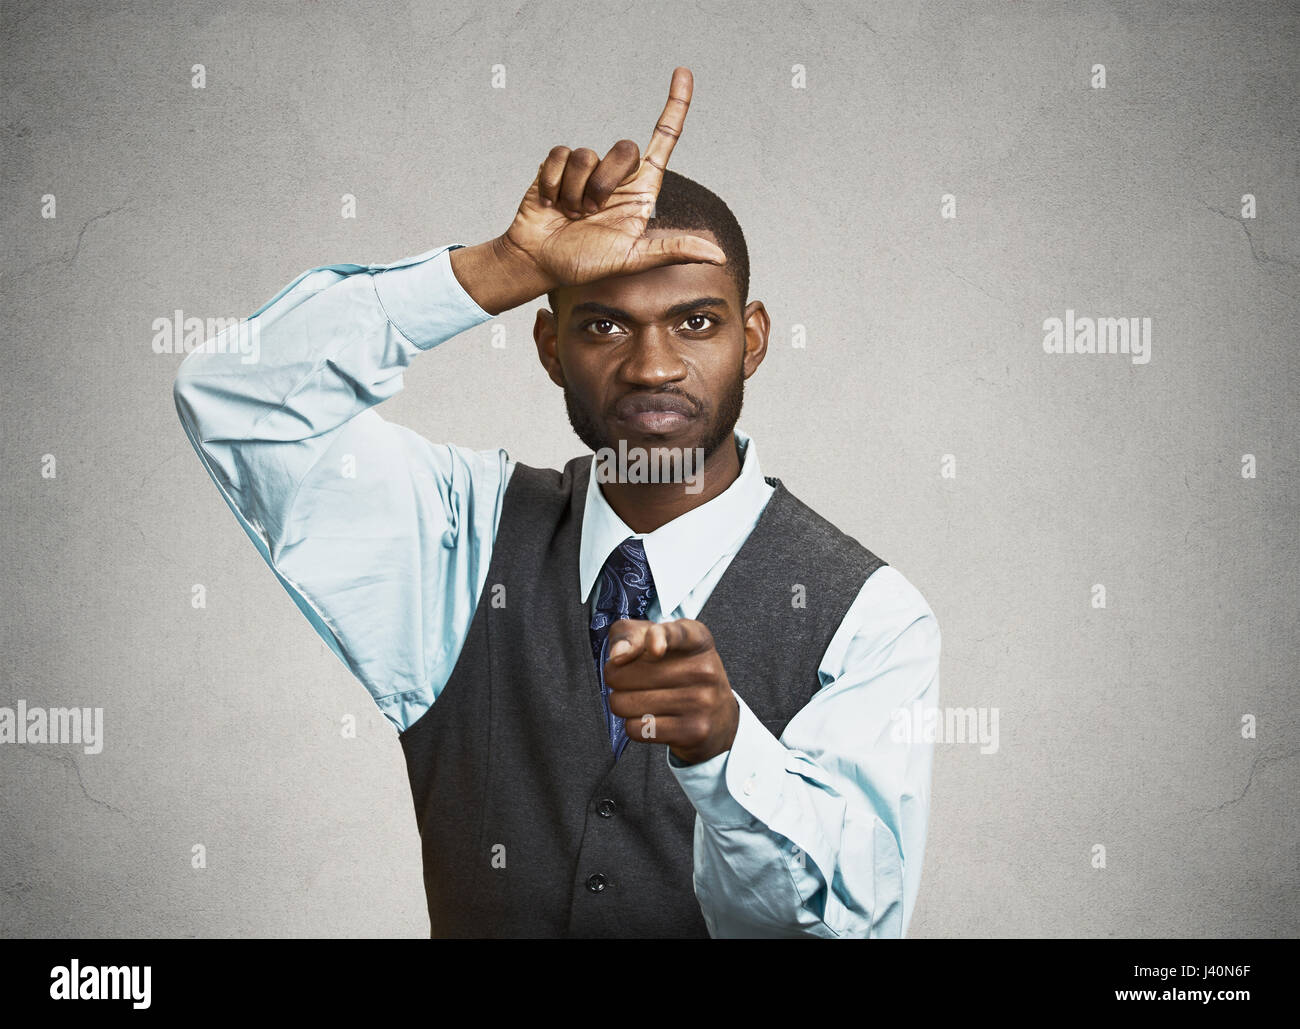 Closeup portrait angry mad young Unhappy Man, student displaying Loser Sign on forehead, pointing at you with disgust, isolated grey background. Negat Stock Photo